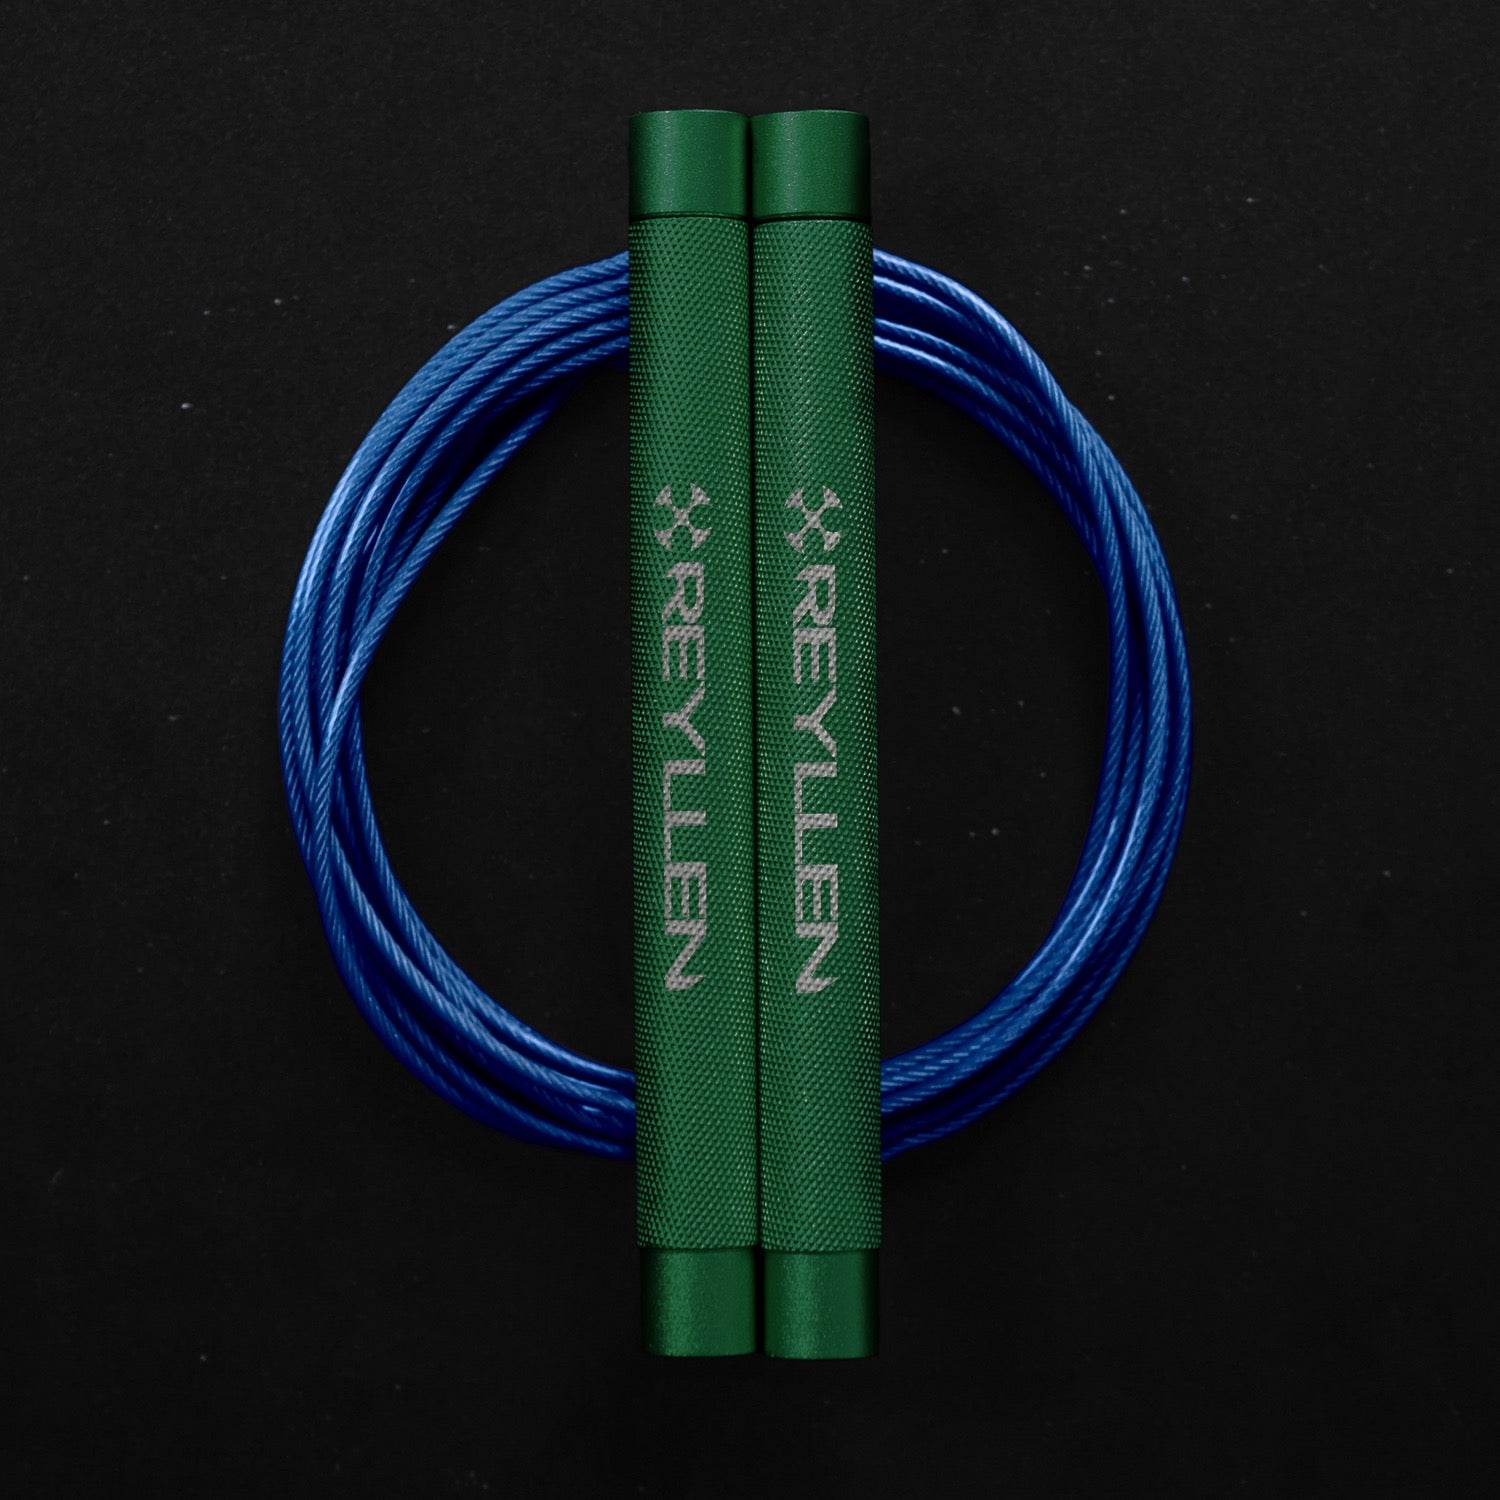 Reyllen Flare Mx Speed Skipping Jump Rope - Aluminium Handles - green with blue pvc coated cable